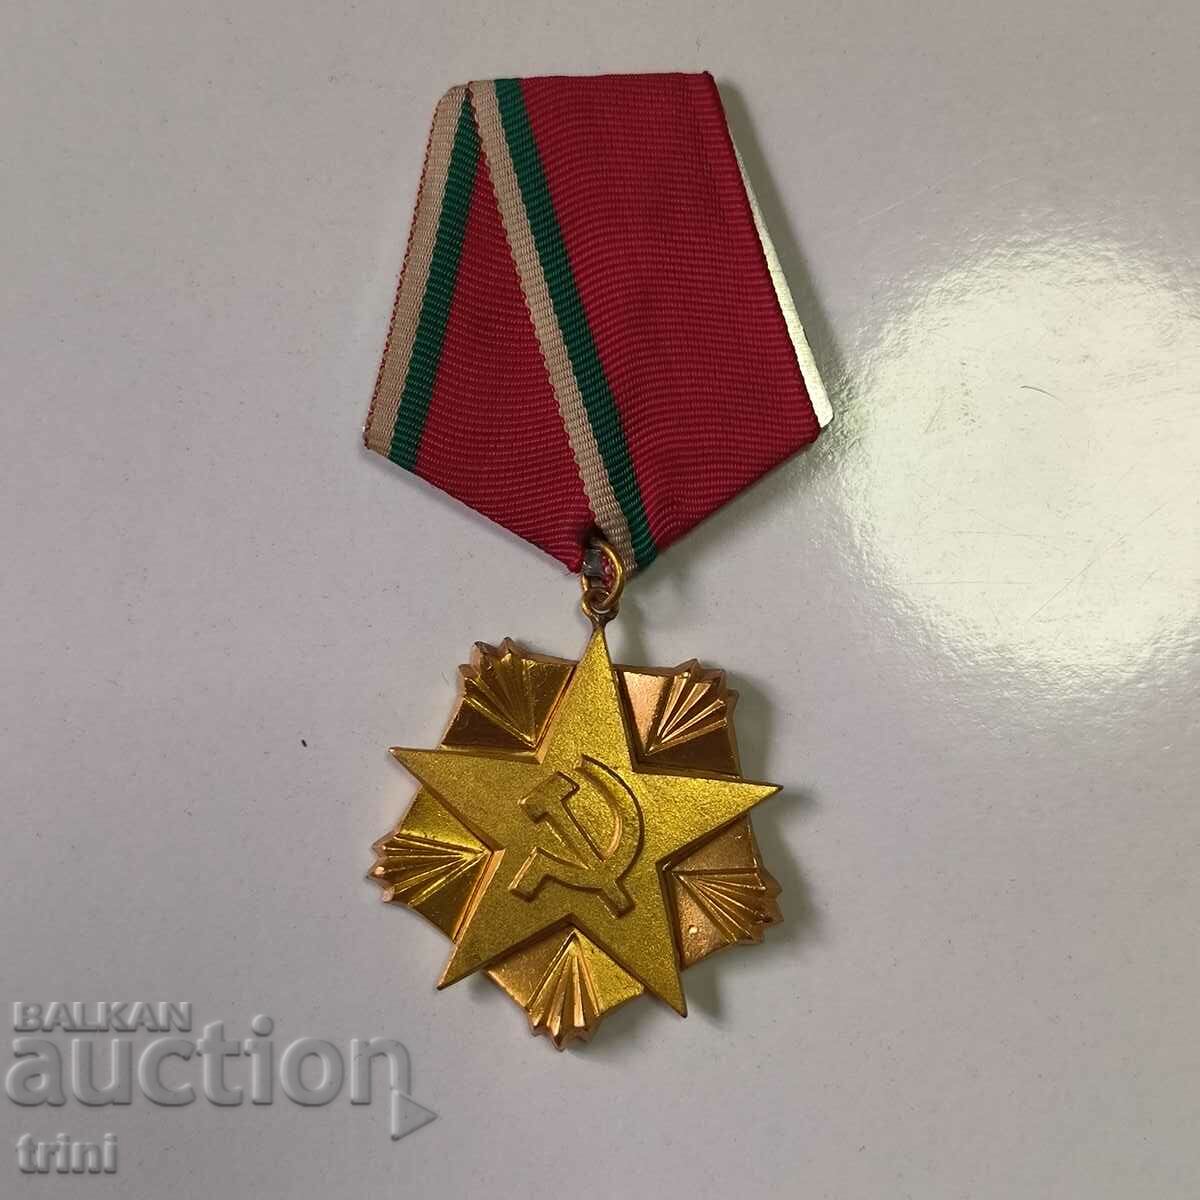 Order of Labor 1977 1st degree - gold